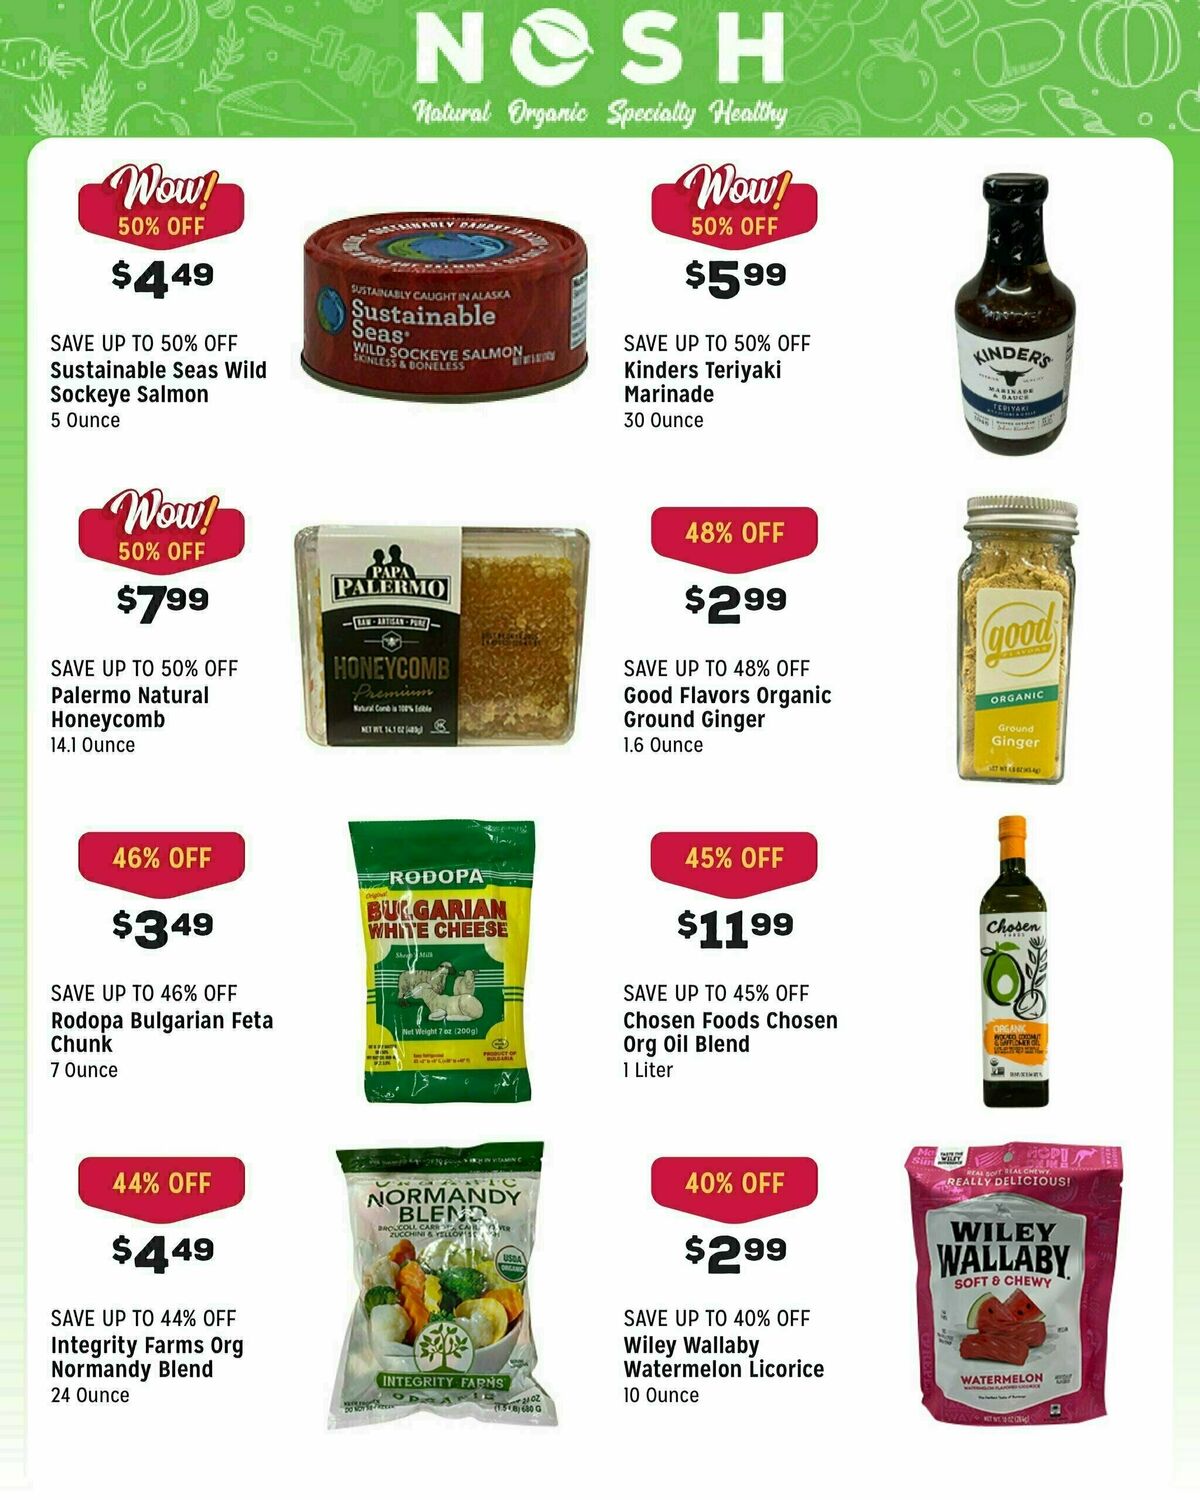 Grocery Outlet Weekly Ad from October 18